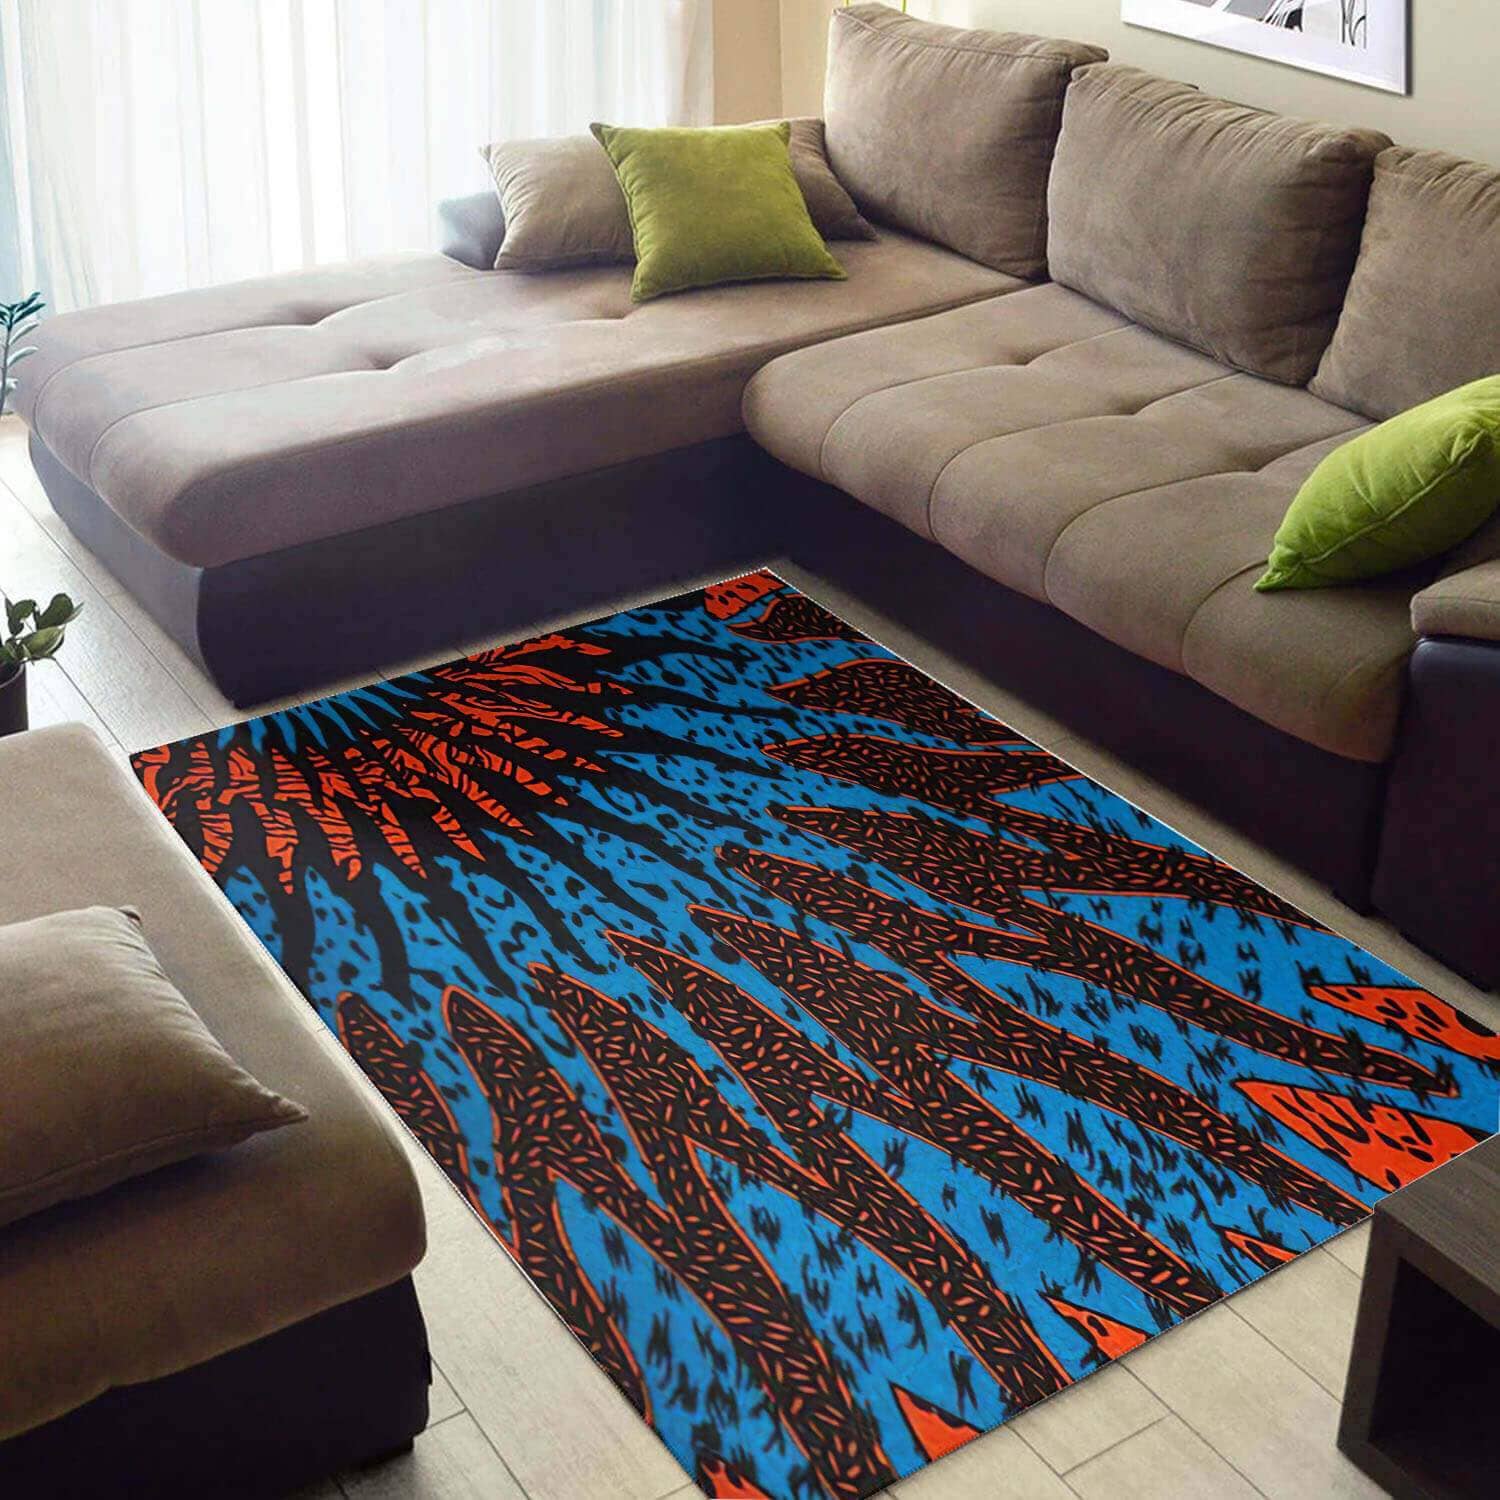 Nice African Retro American Black Art Afrocentric Pattern Large Room Rug